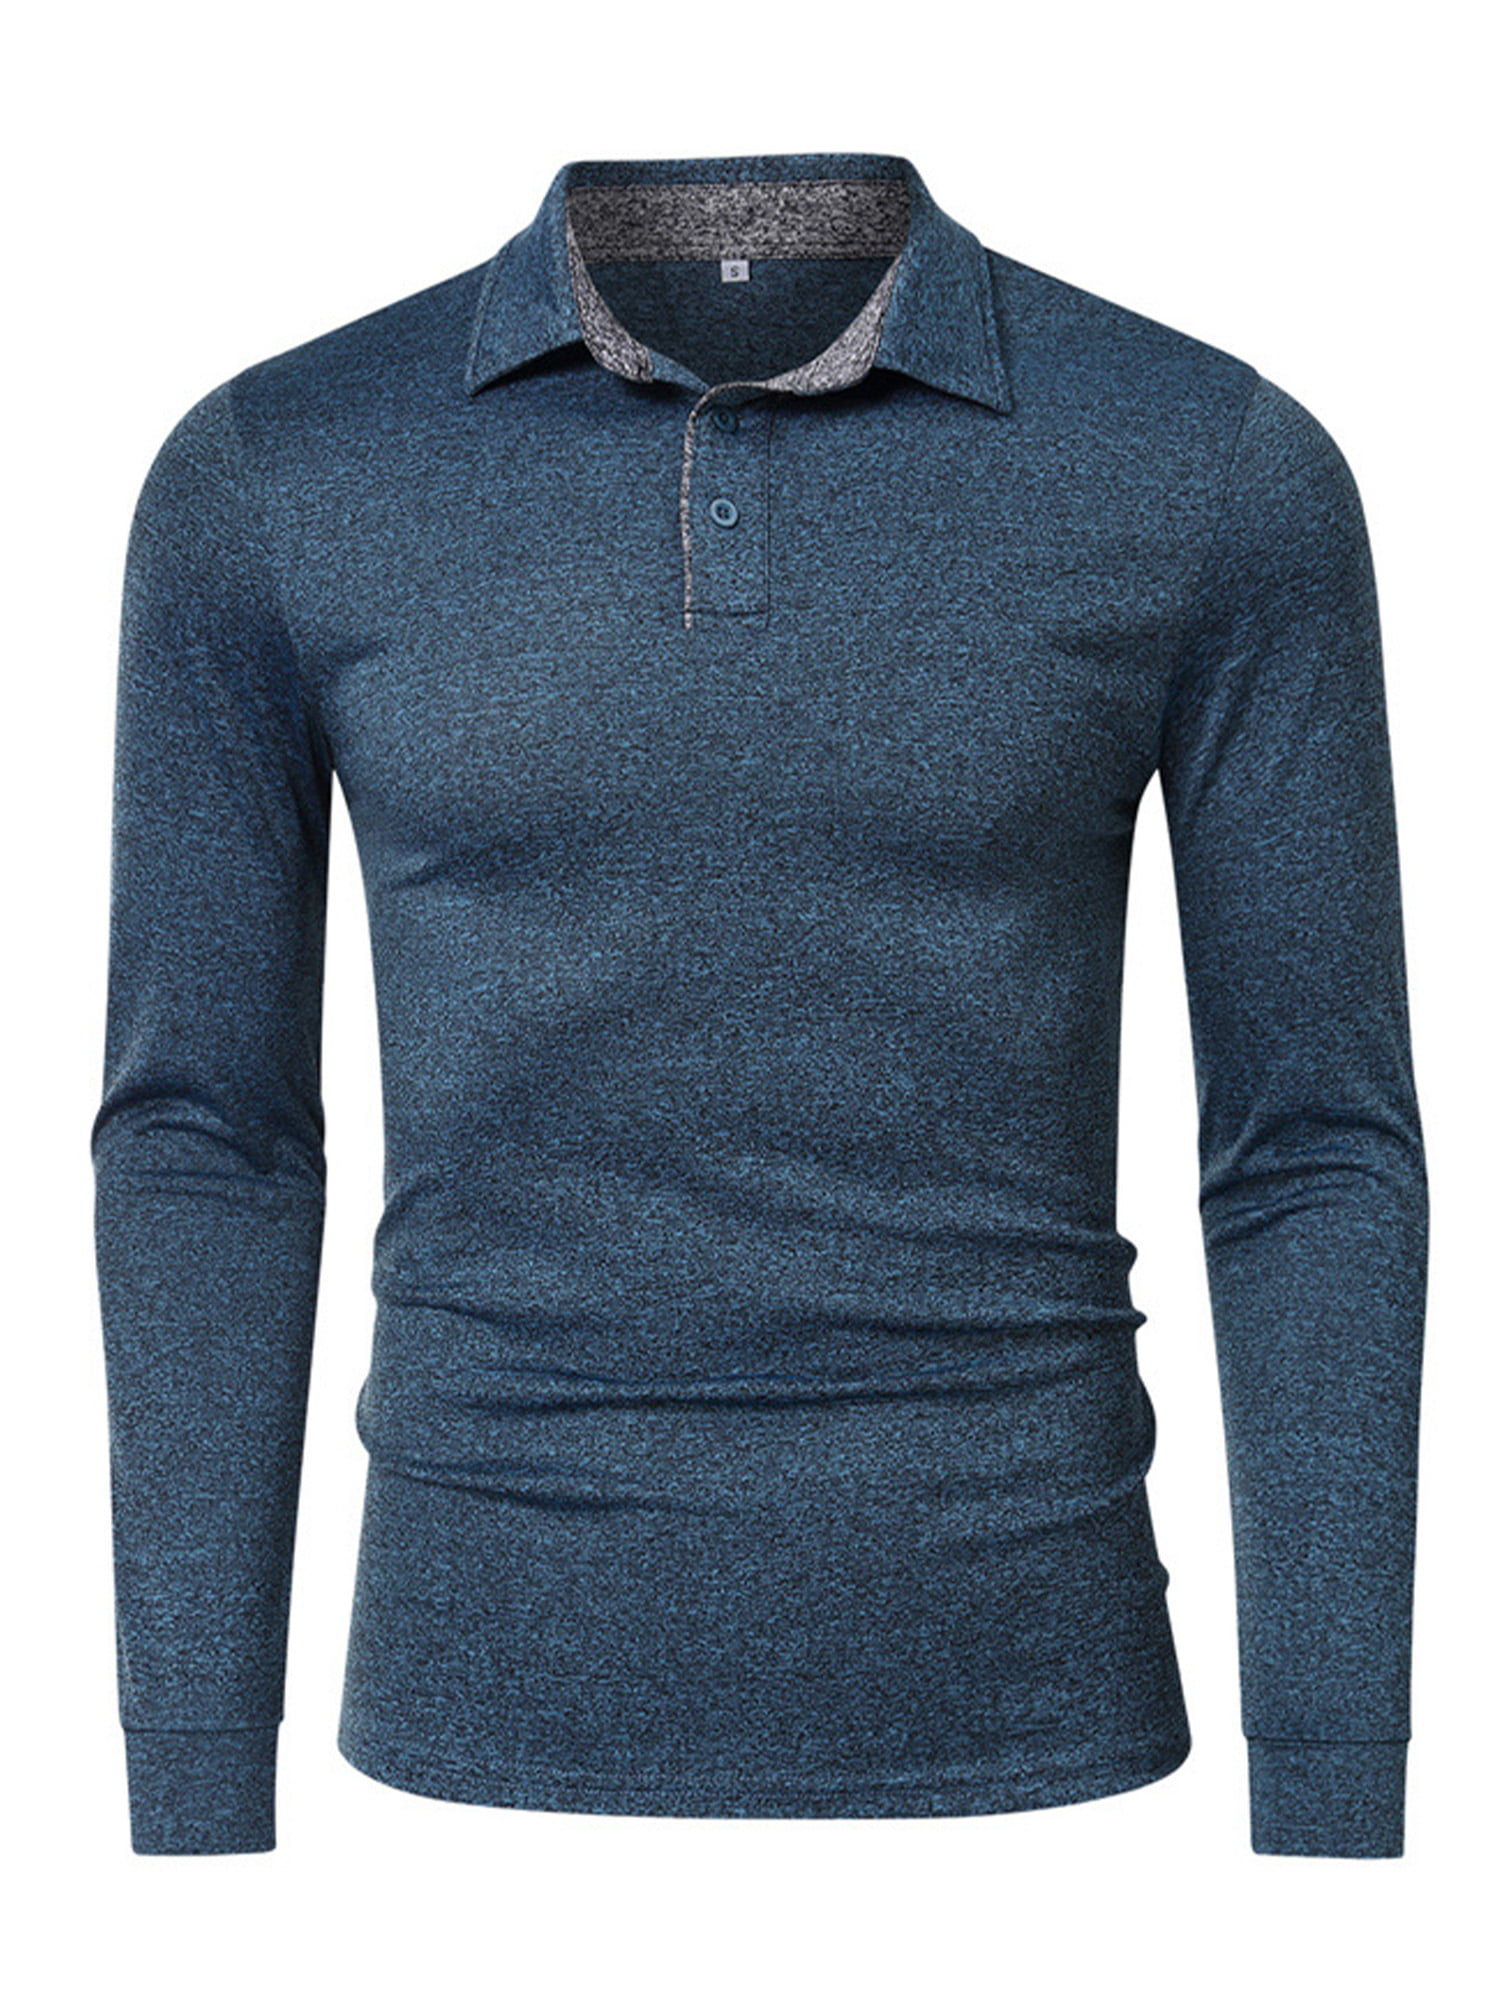 Details about   Mens Fashion Long Sleeve Knit Polo Shirts Sweater Men Loose Lapel Jumpers Tops 